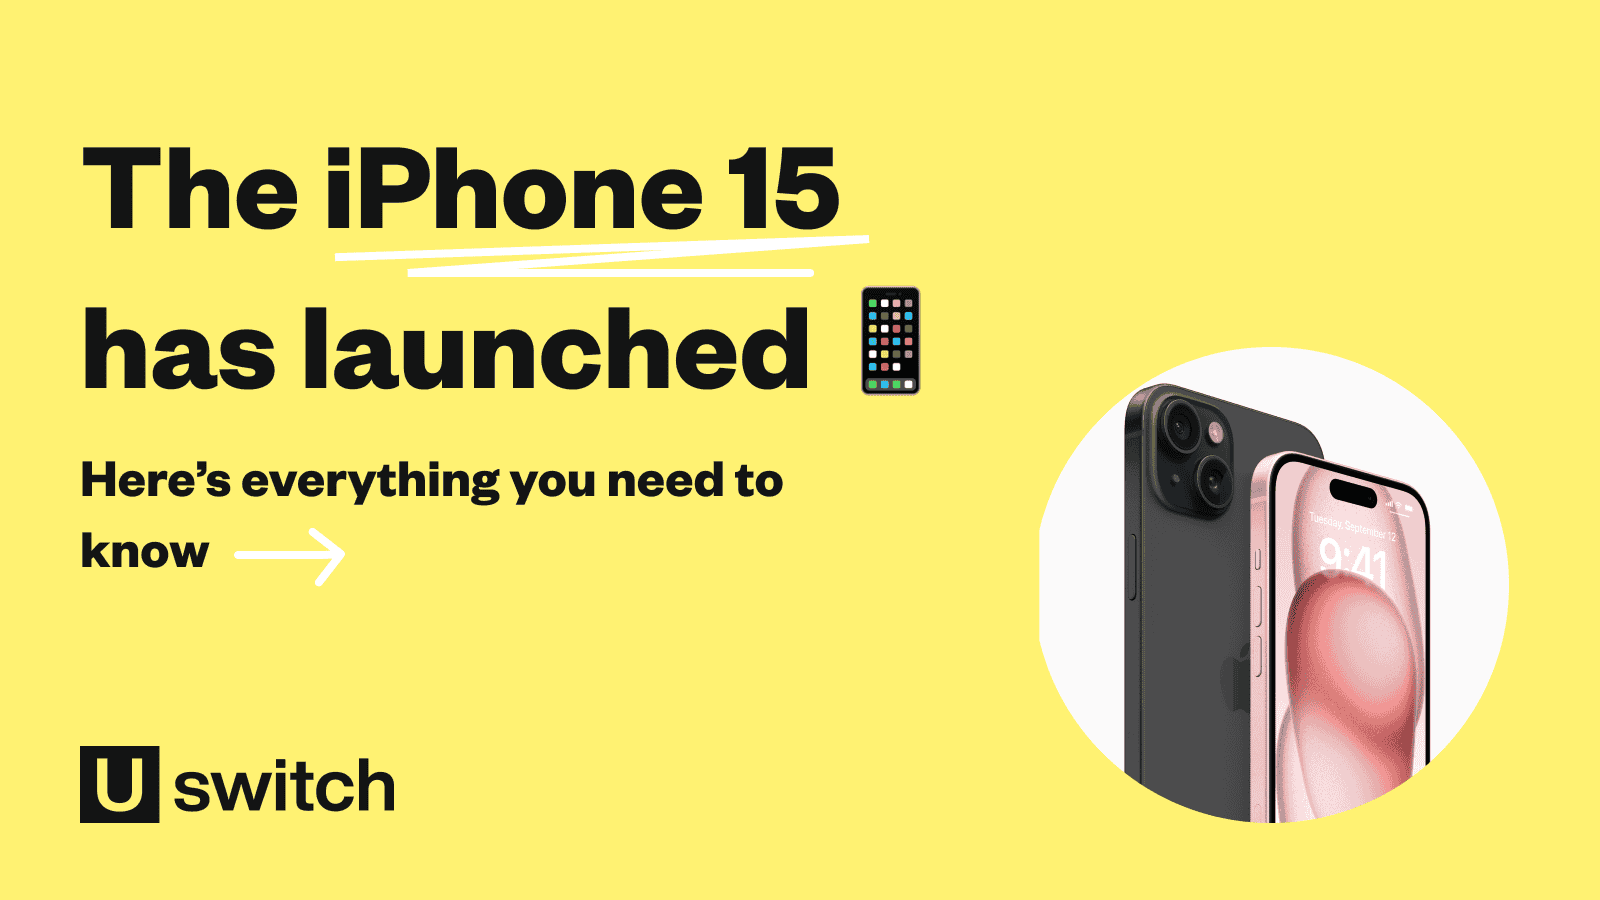 iphone 15 lauched